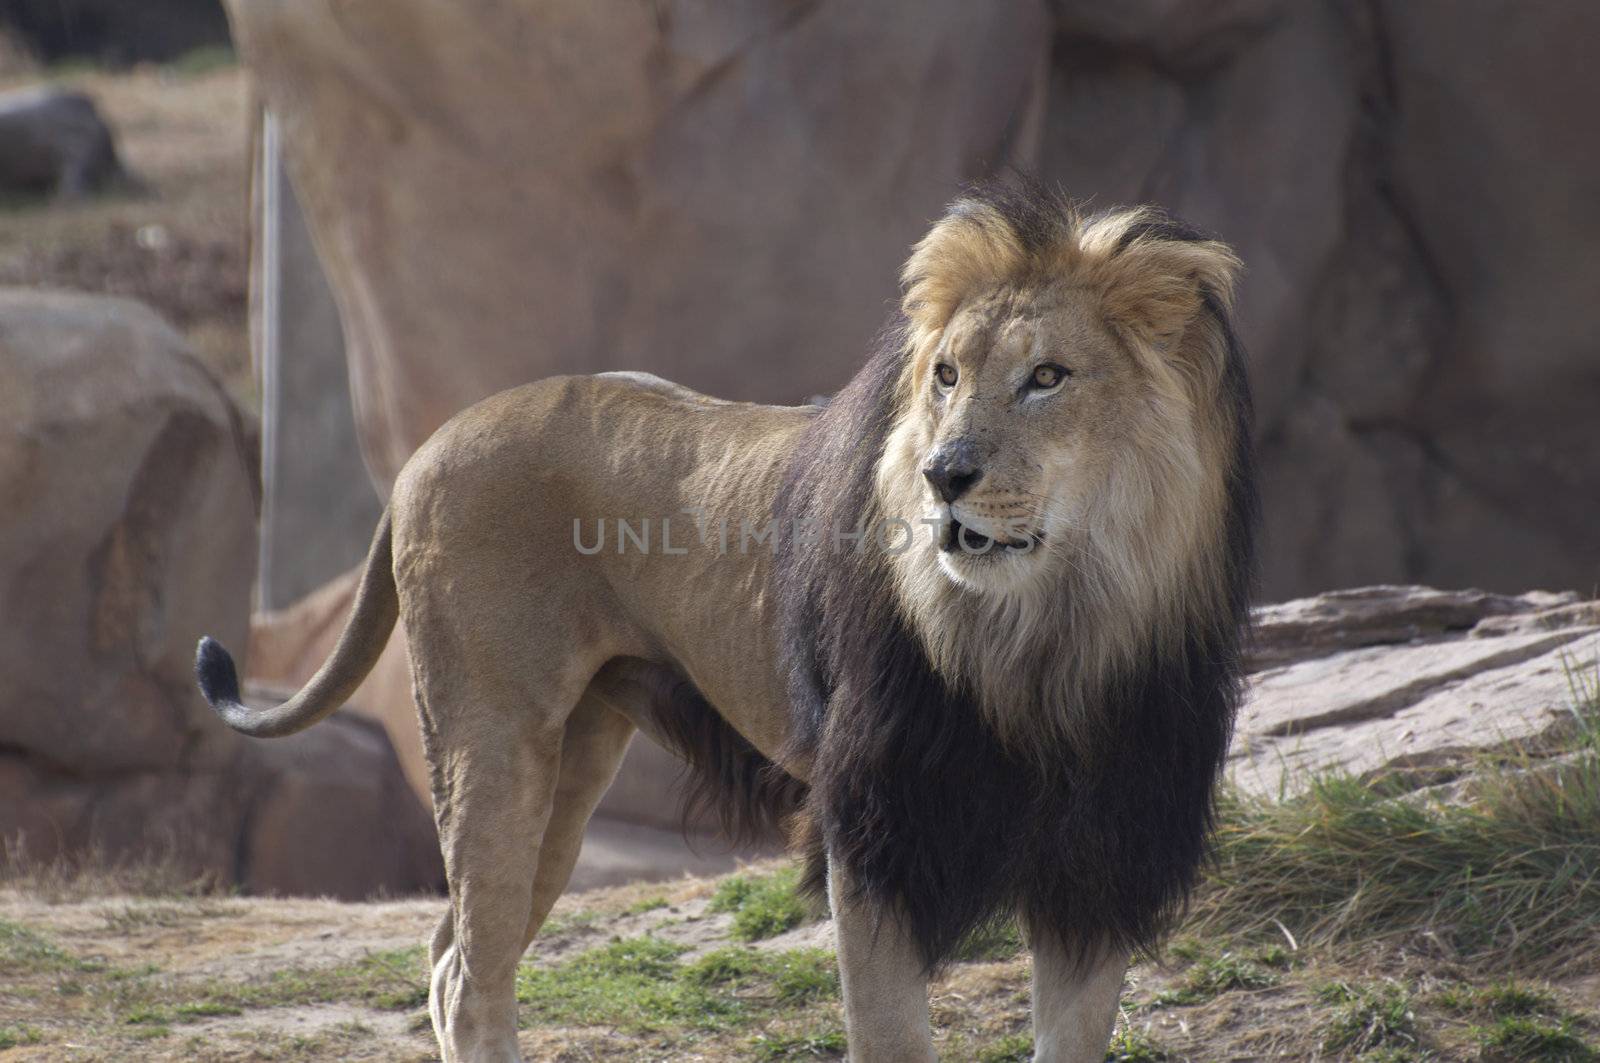 A large male lion roams around at the Denver Zoo.